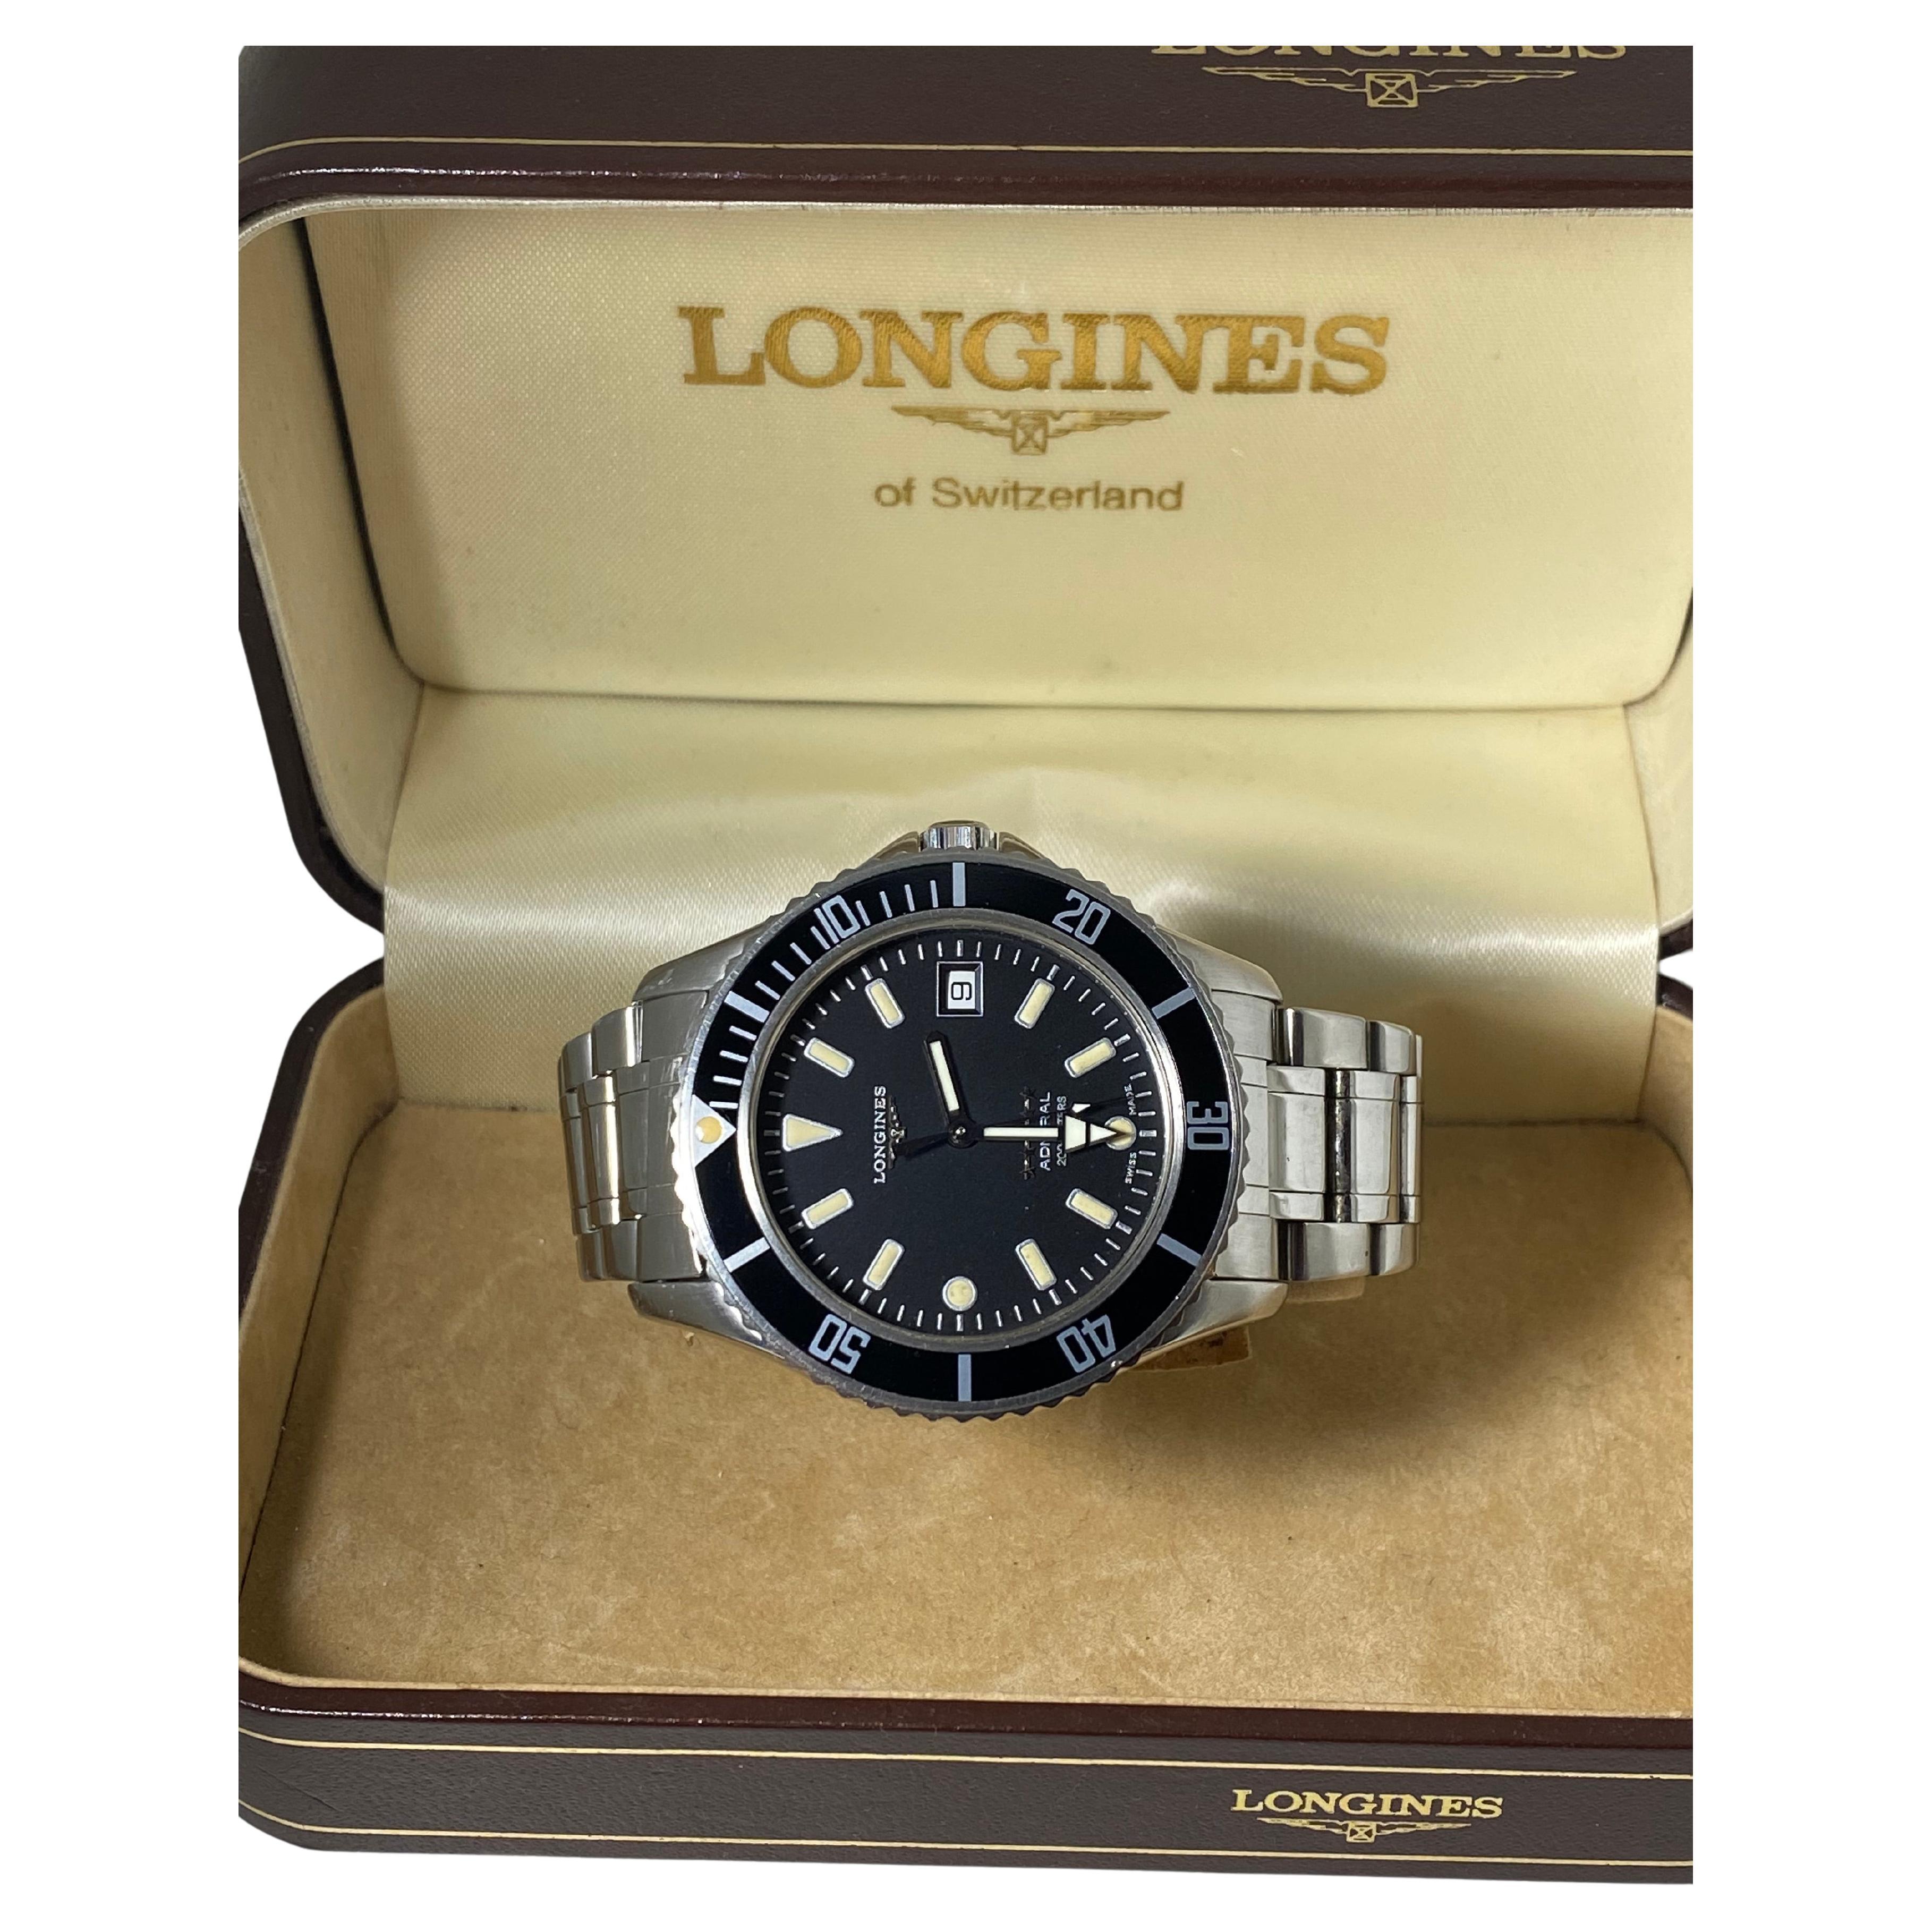 Longines ref. 7463 5-Star Admiral 200m Automatic Divers Watch. Box + Link. 90's. For Sale